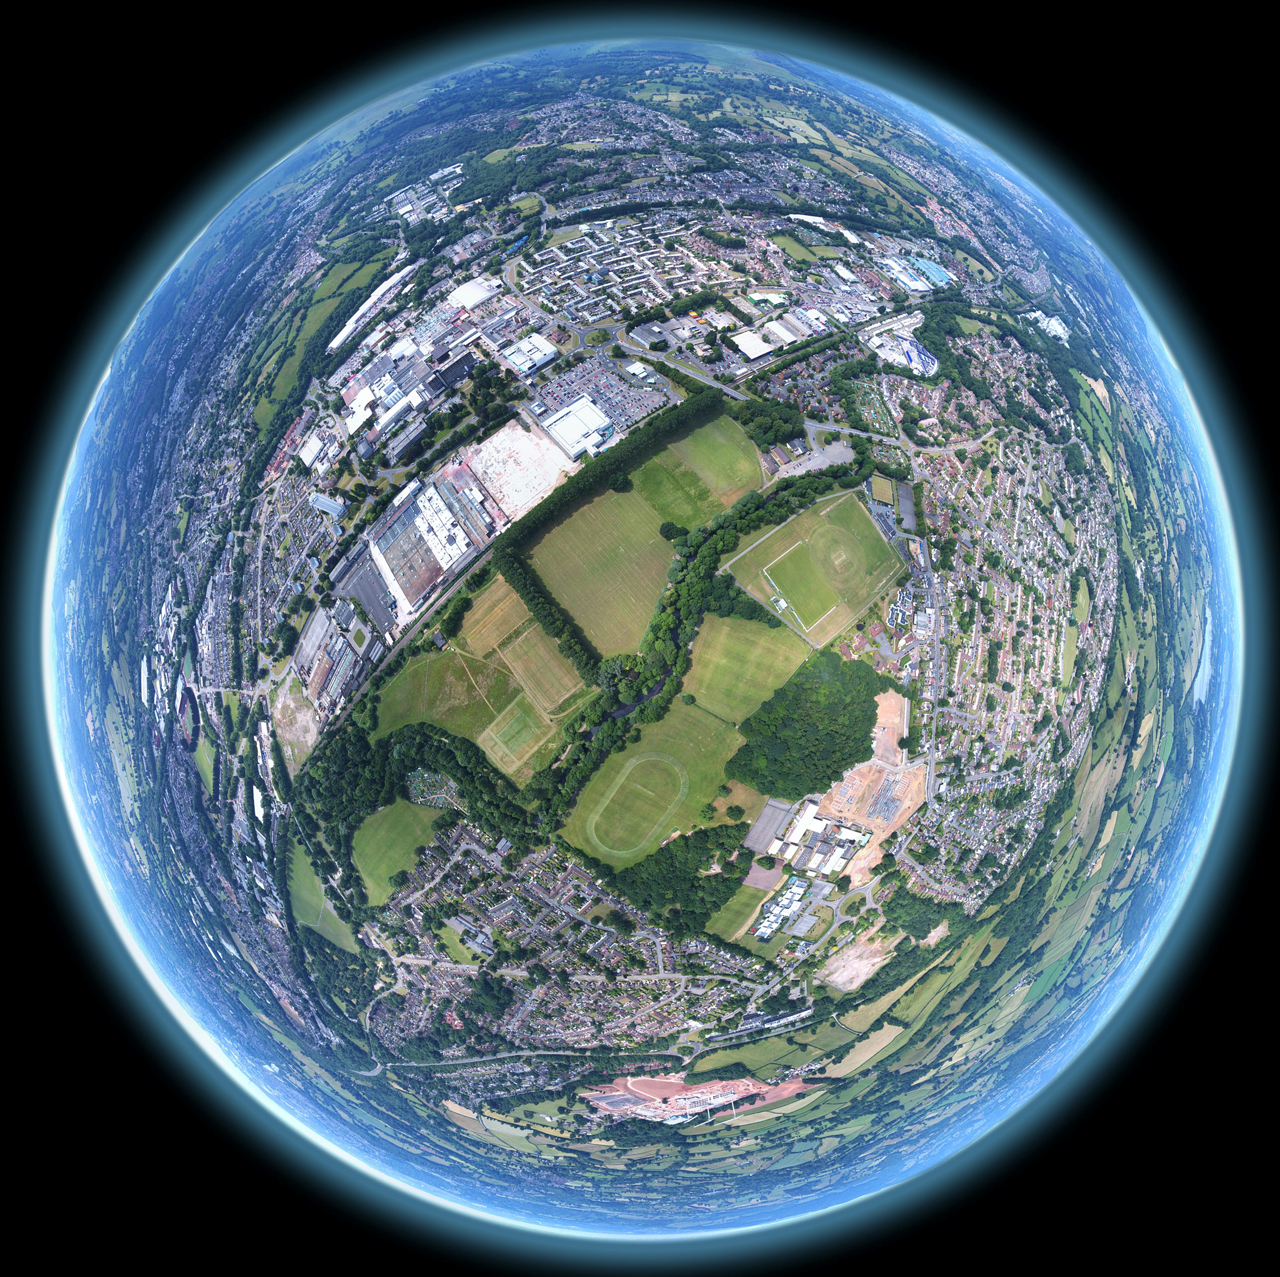 A 360 panorama stitched and warped to create the tiny planet effect | Photo by Louis Reed on Unsplash.com